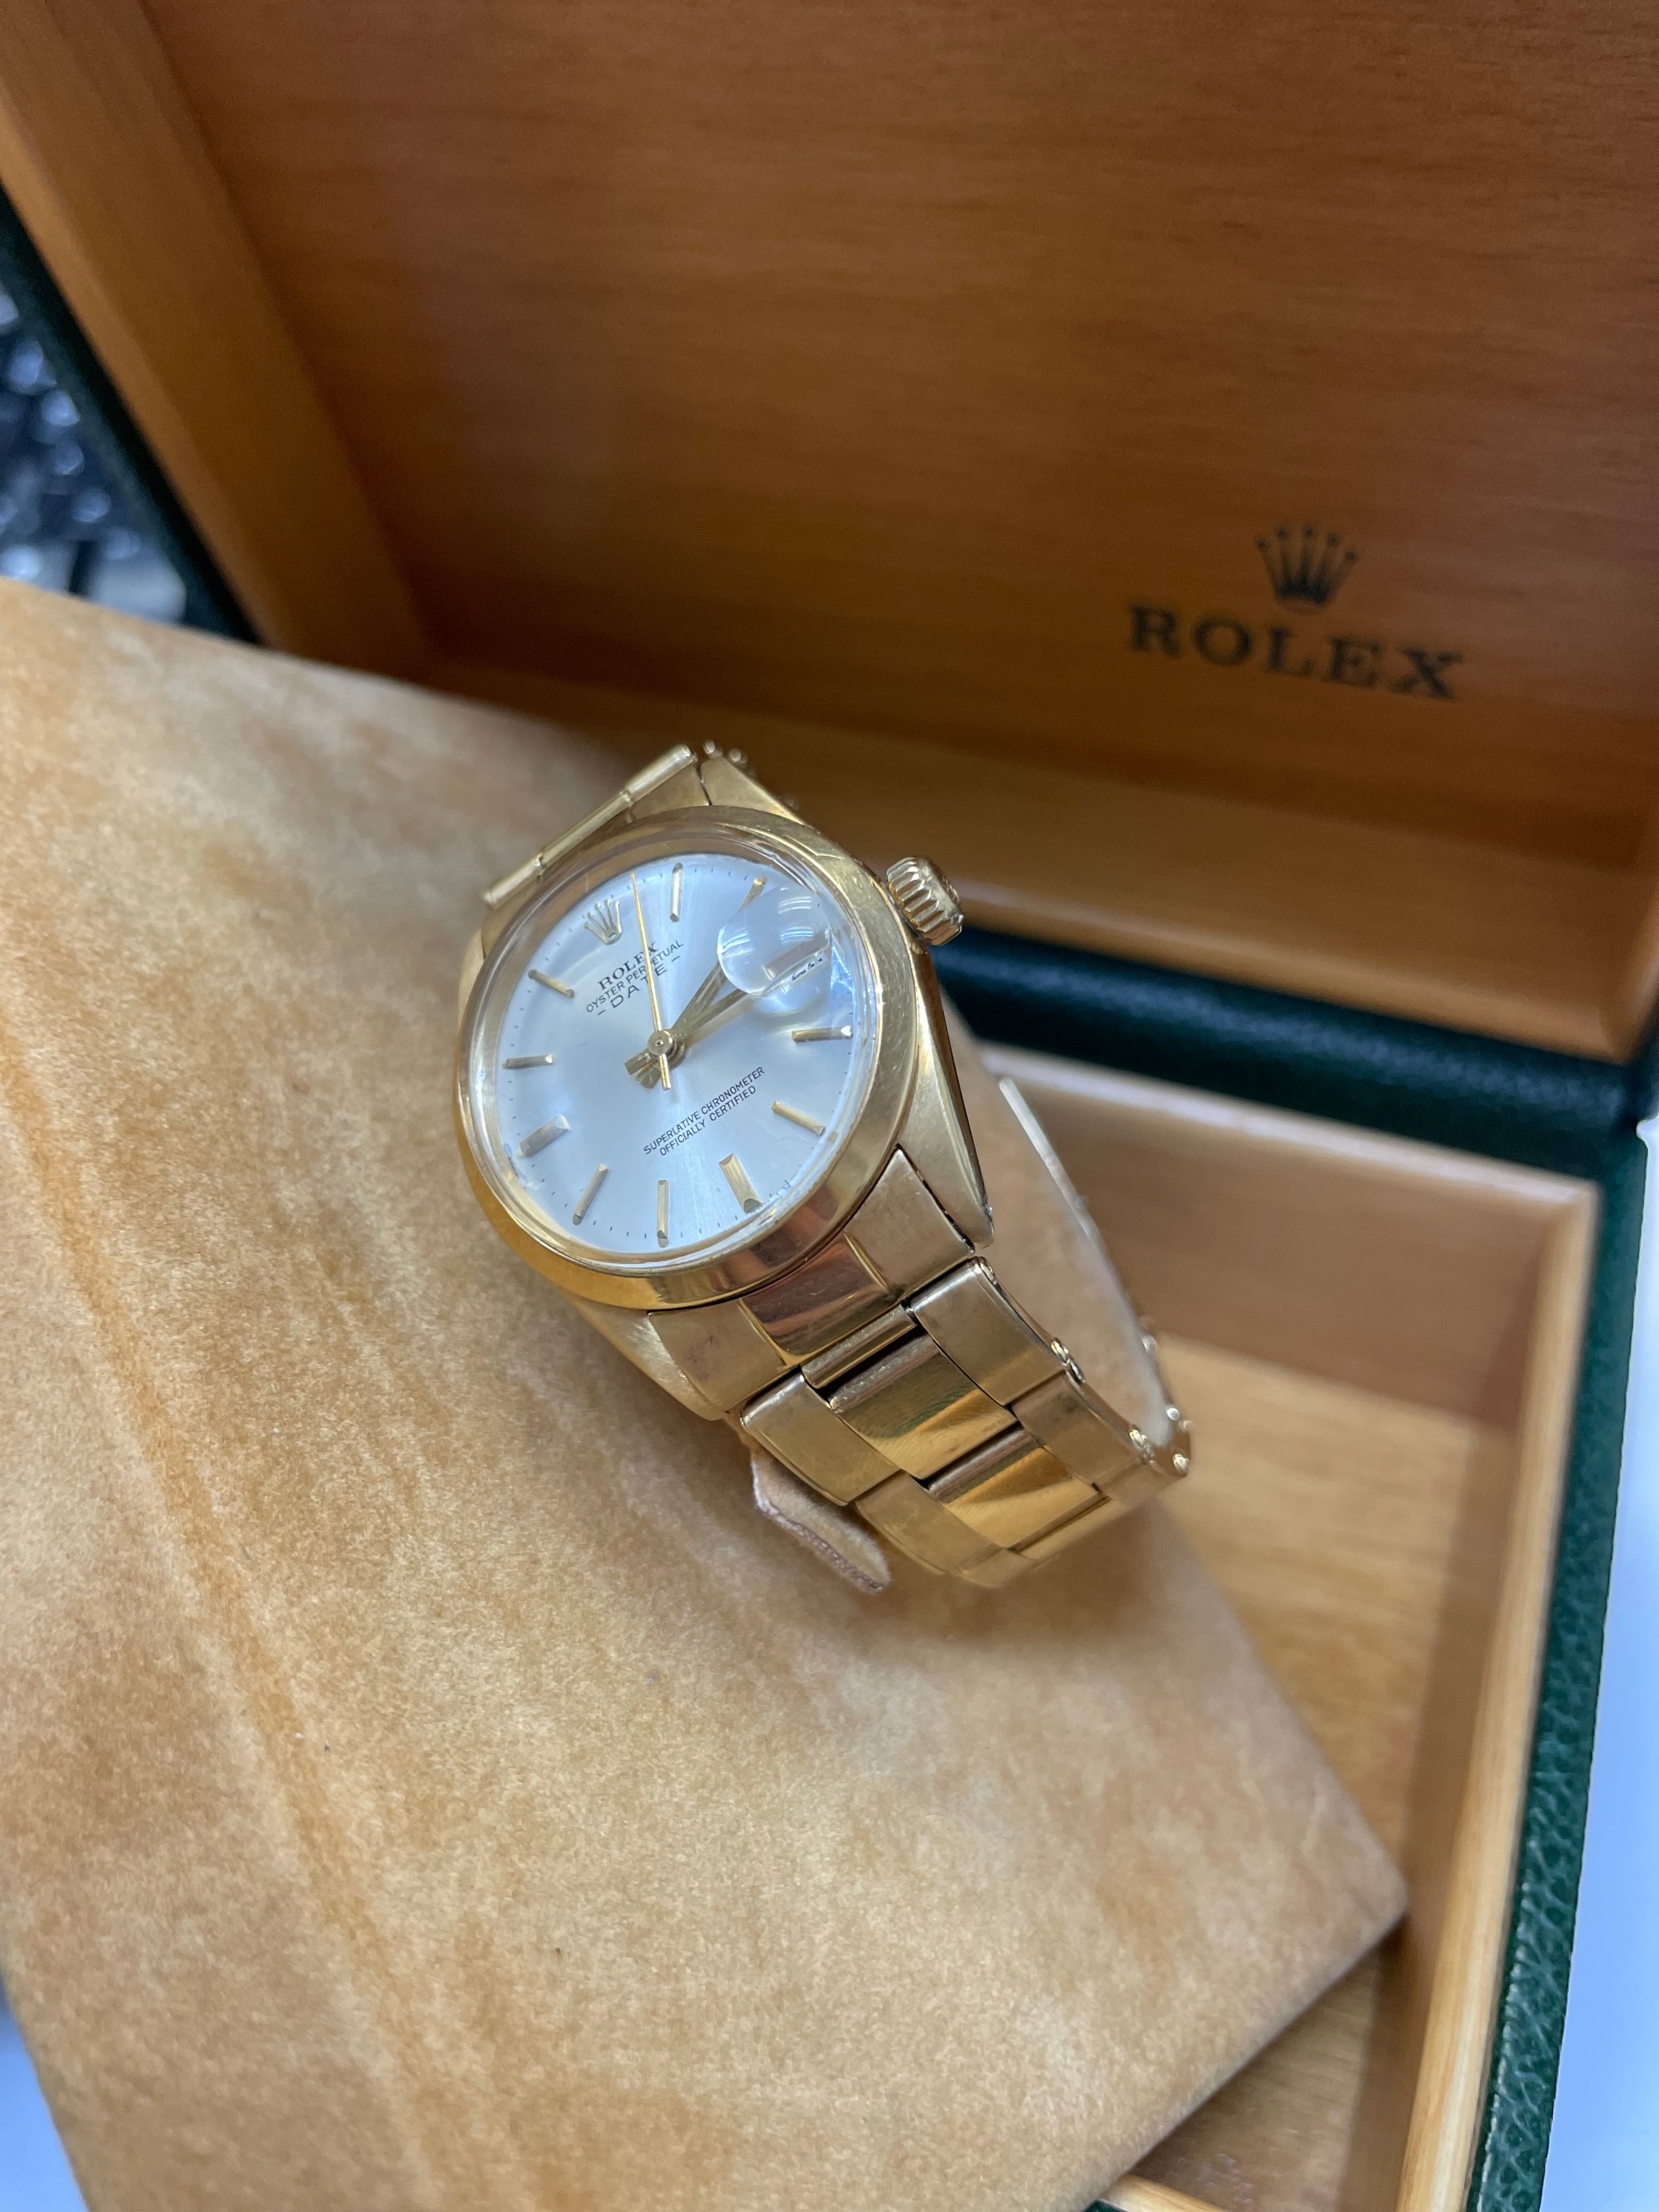 31mm Rolex Solid 18K Yellow Gold with Oyster Strap